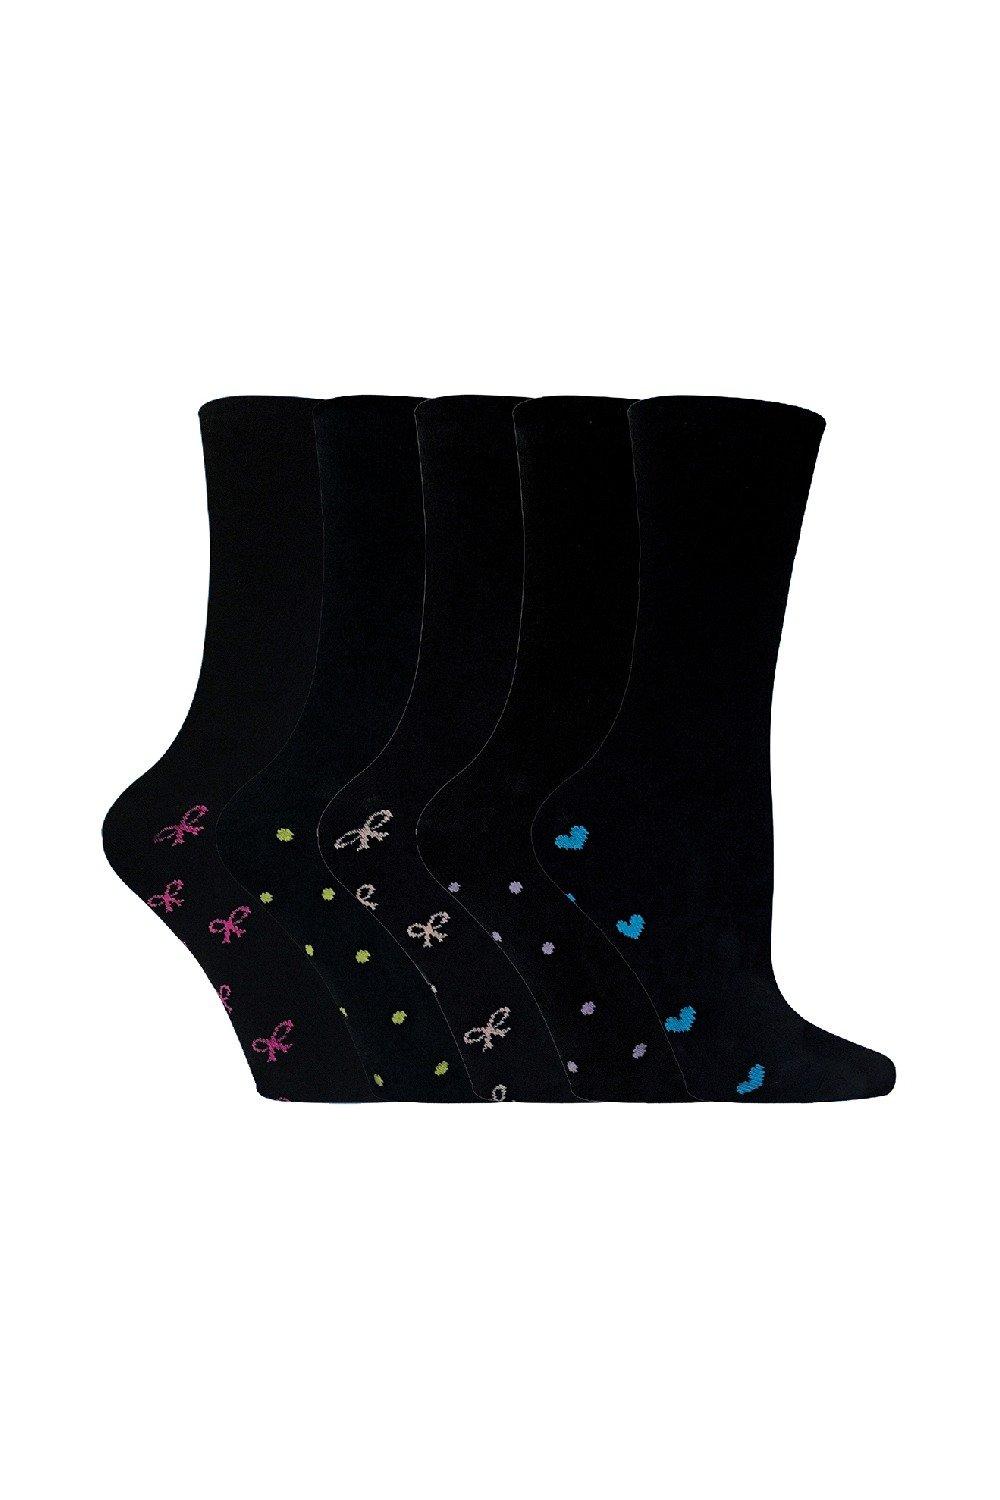 5 Pairs Black Cotton Socks with Heart & Pink Bows Design